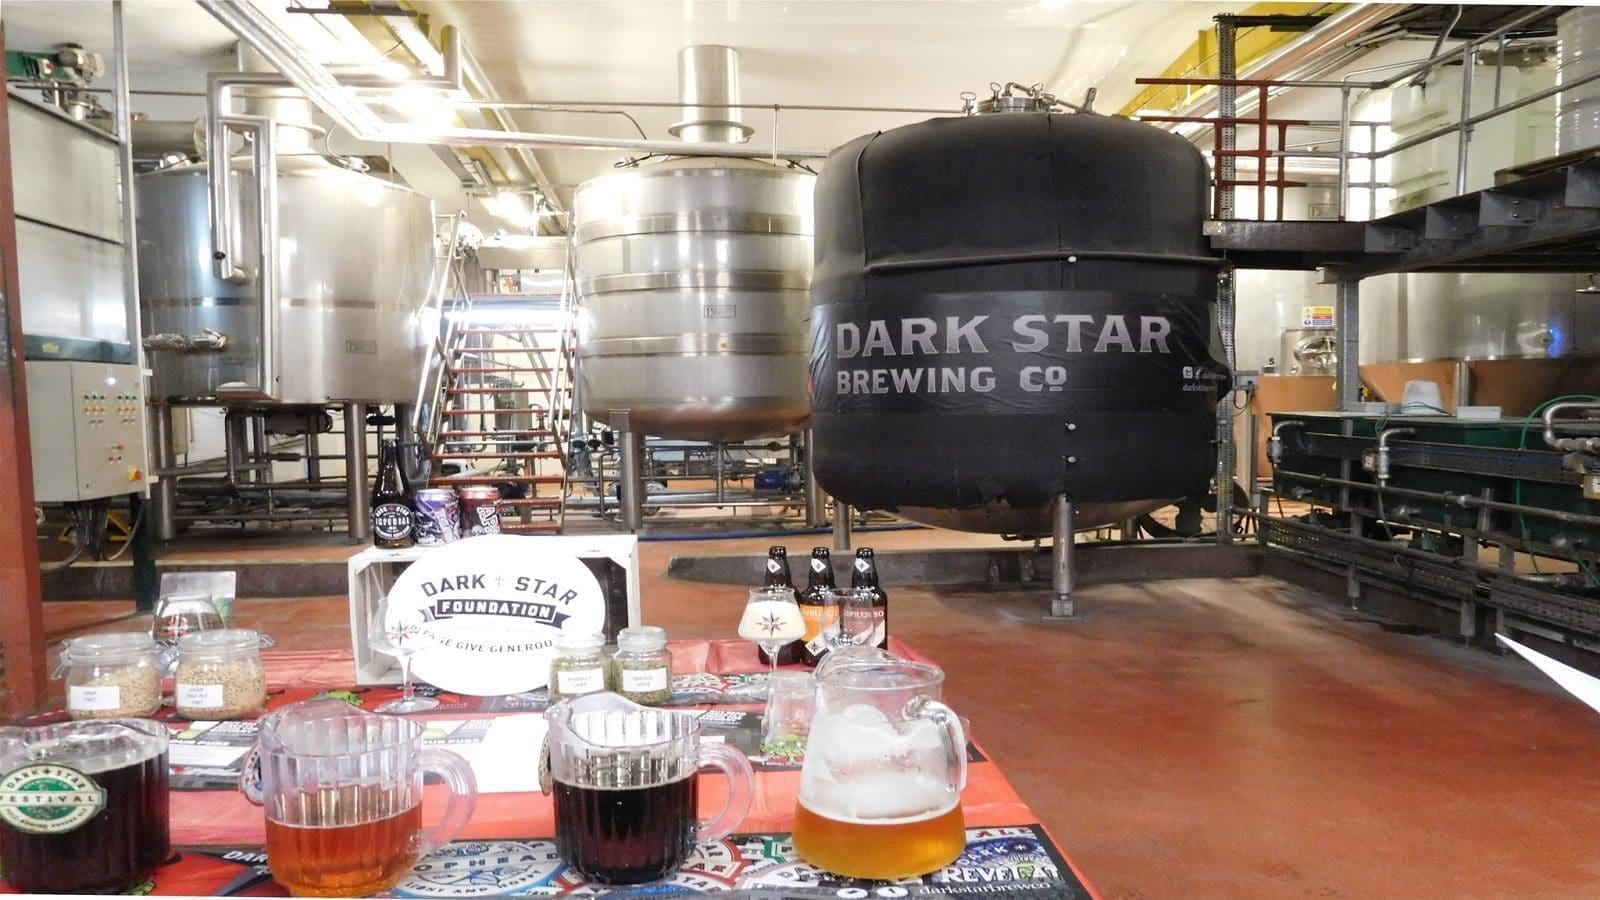 Asahi to close Dark Star brewery owing to economic challenges